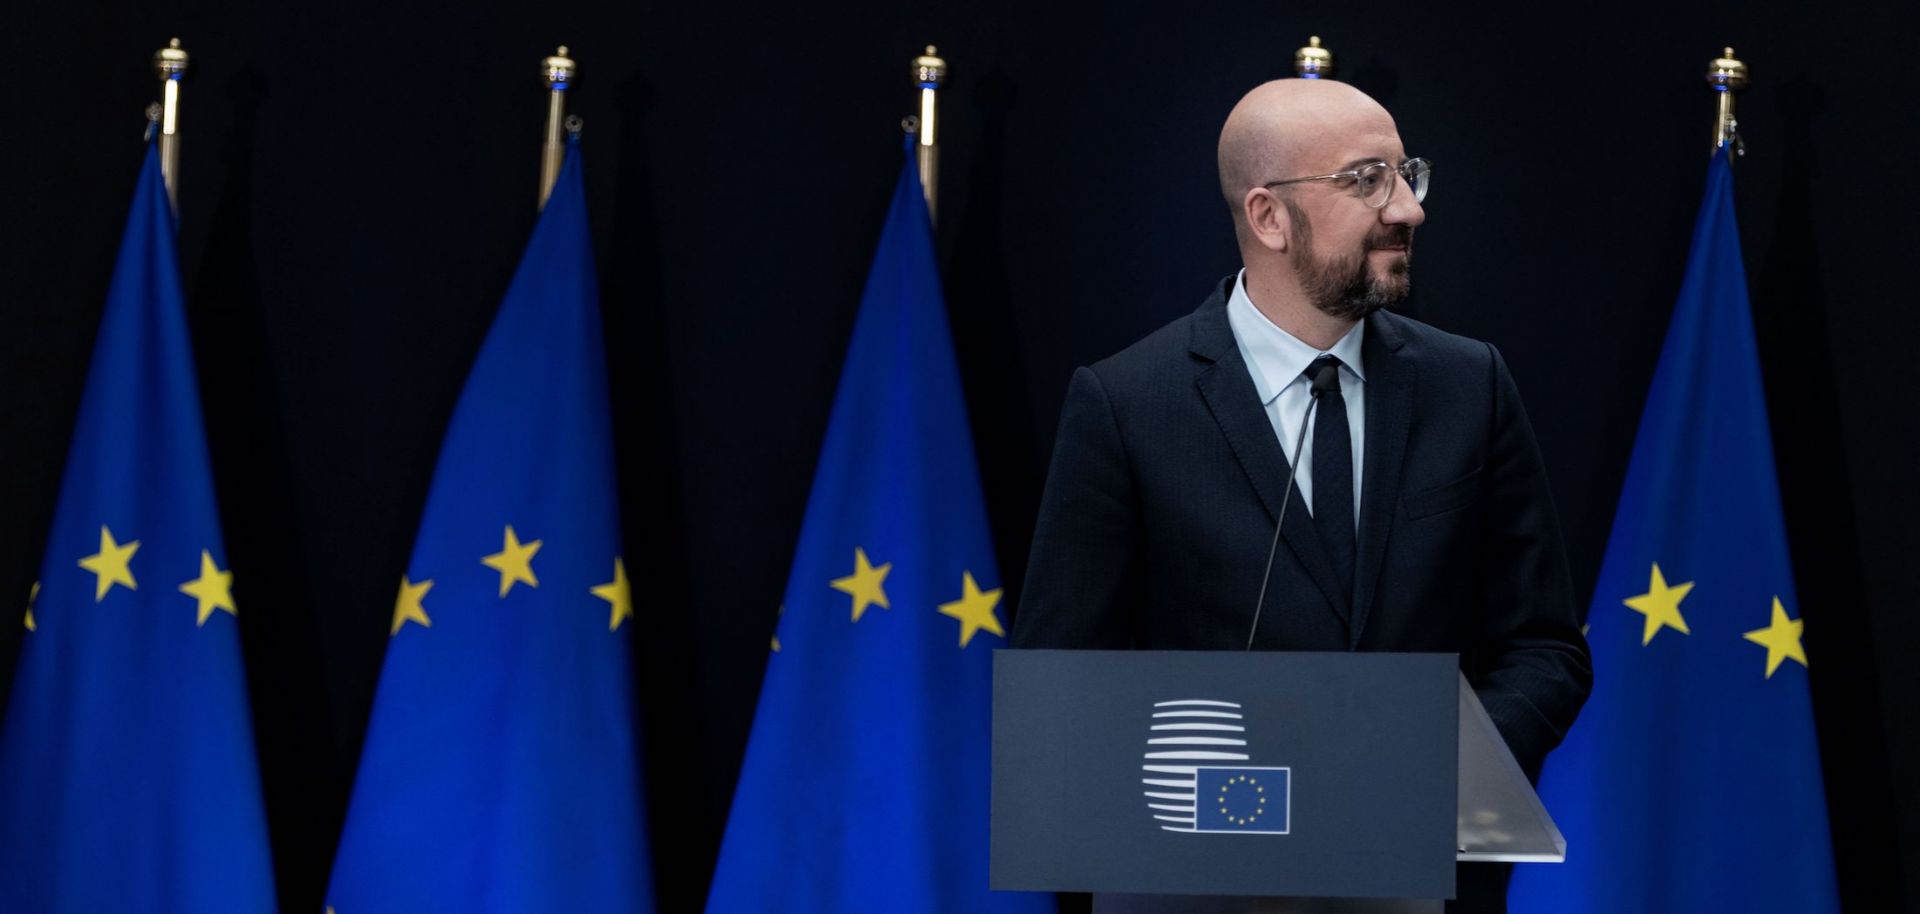 Newly appointed European Council President Charles Michel gives a speech during the handover ceremony between outgoing European Council President Donald Tusk and his successor, Michel, in Brussels on Nov. 29, 2019.